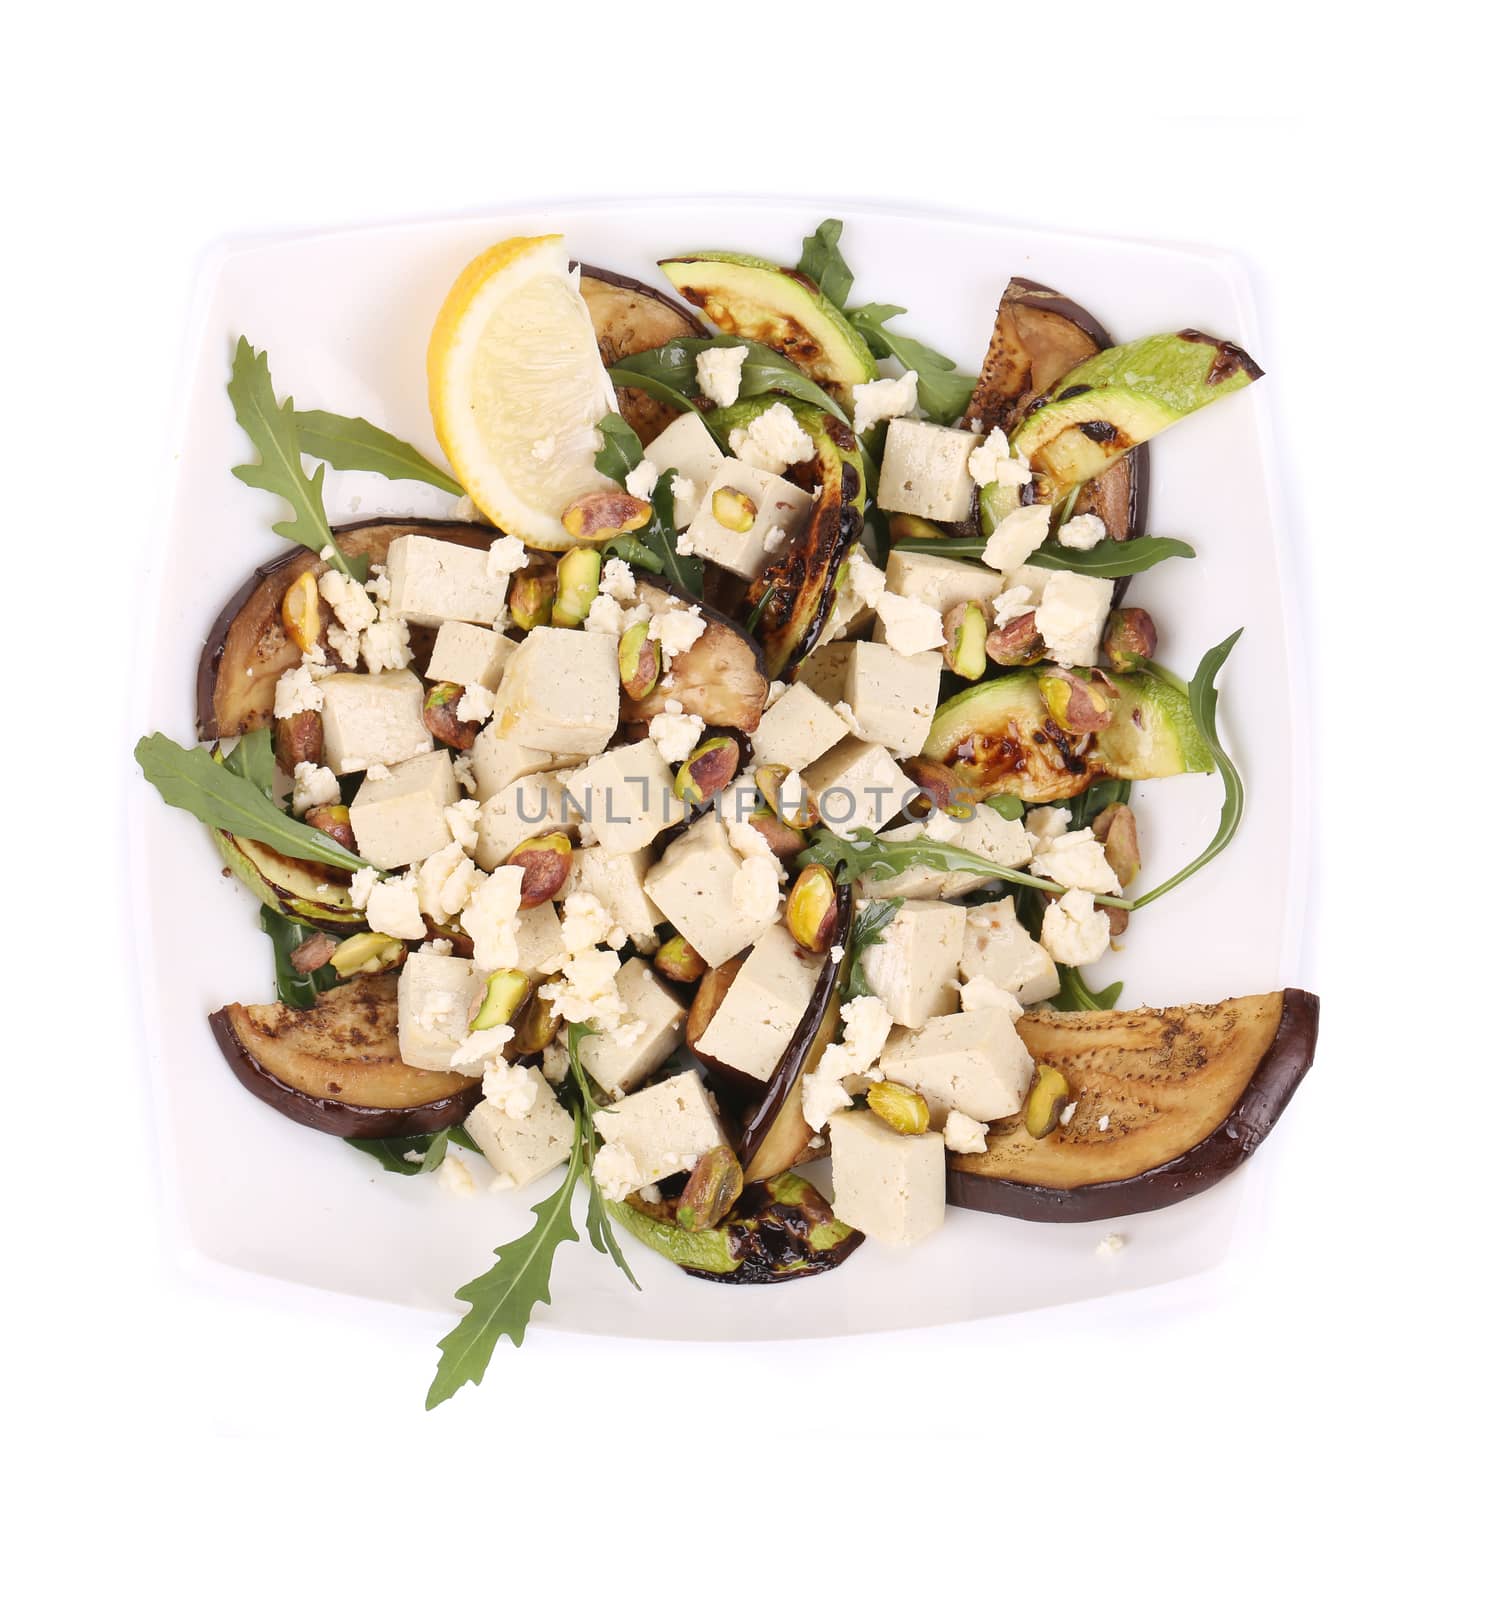 Salad with grilled vegetables and tofu. Isolated on a white background.